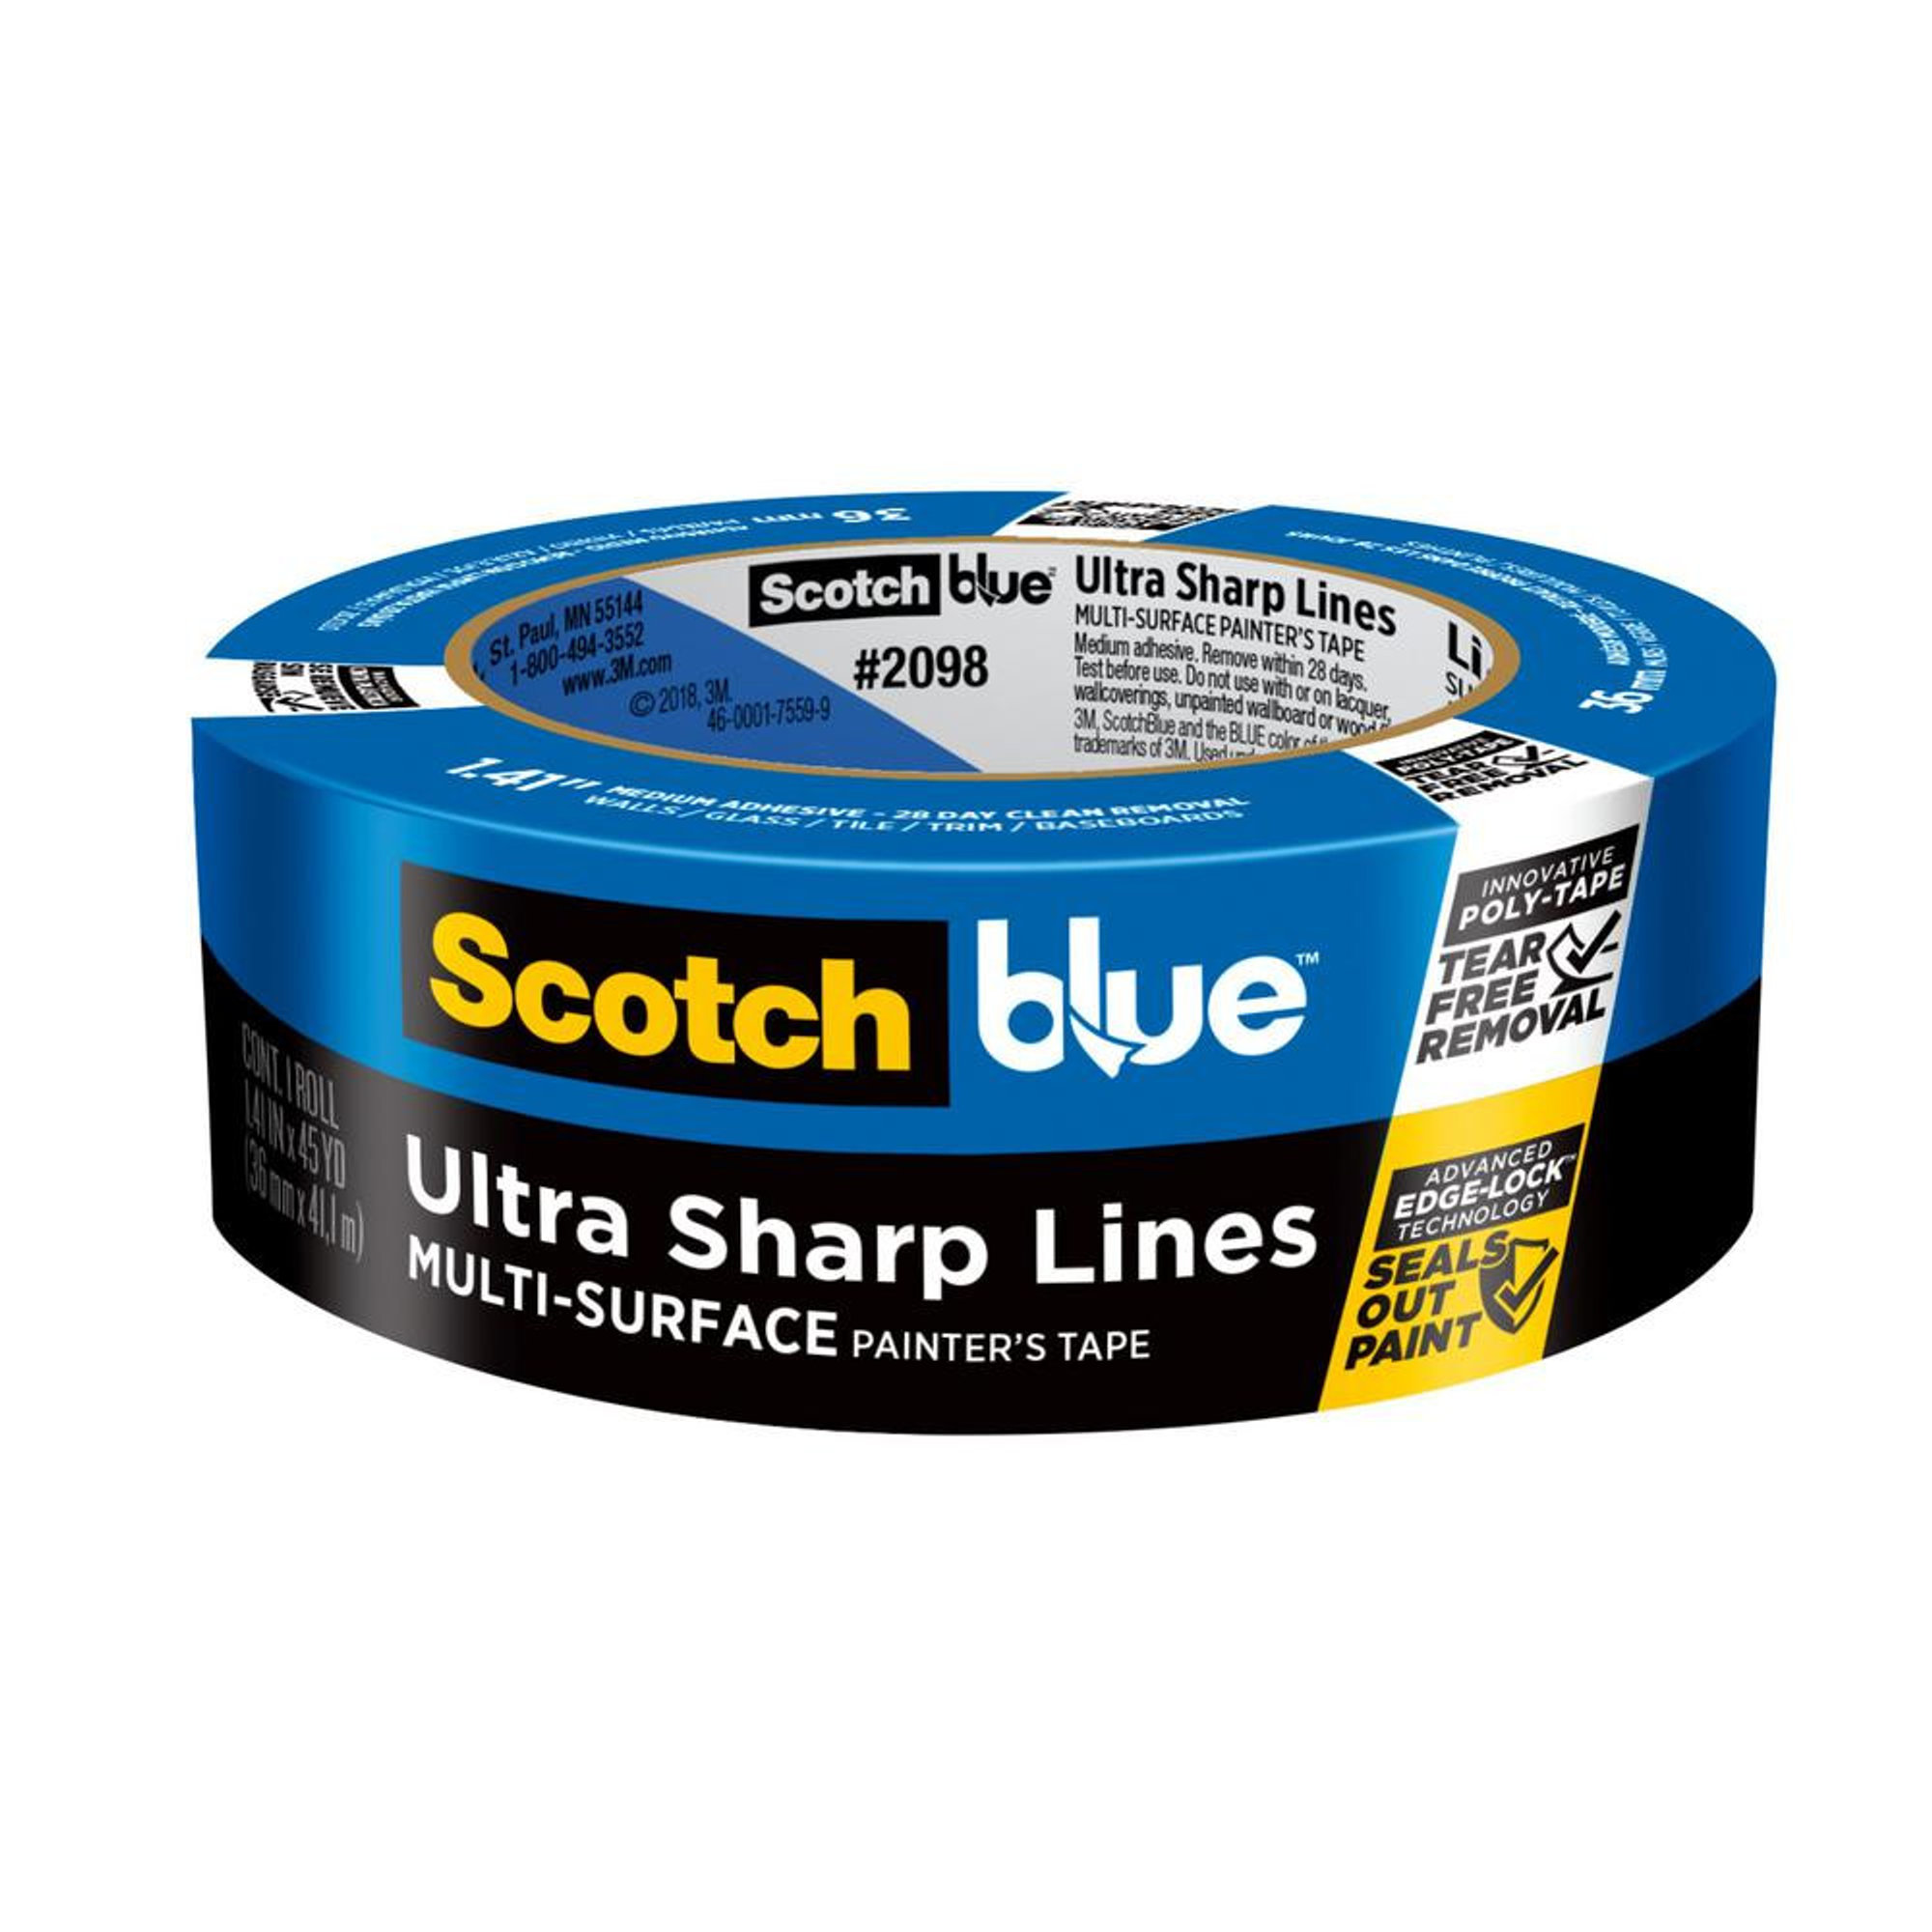 Business Source Multisurface Painter's Tape